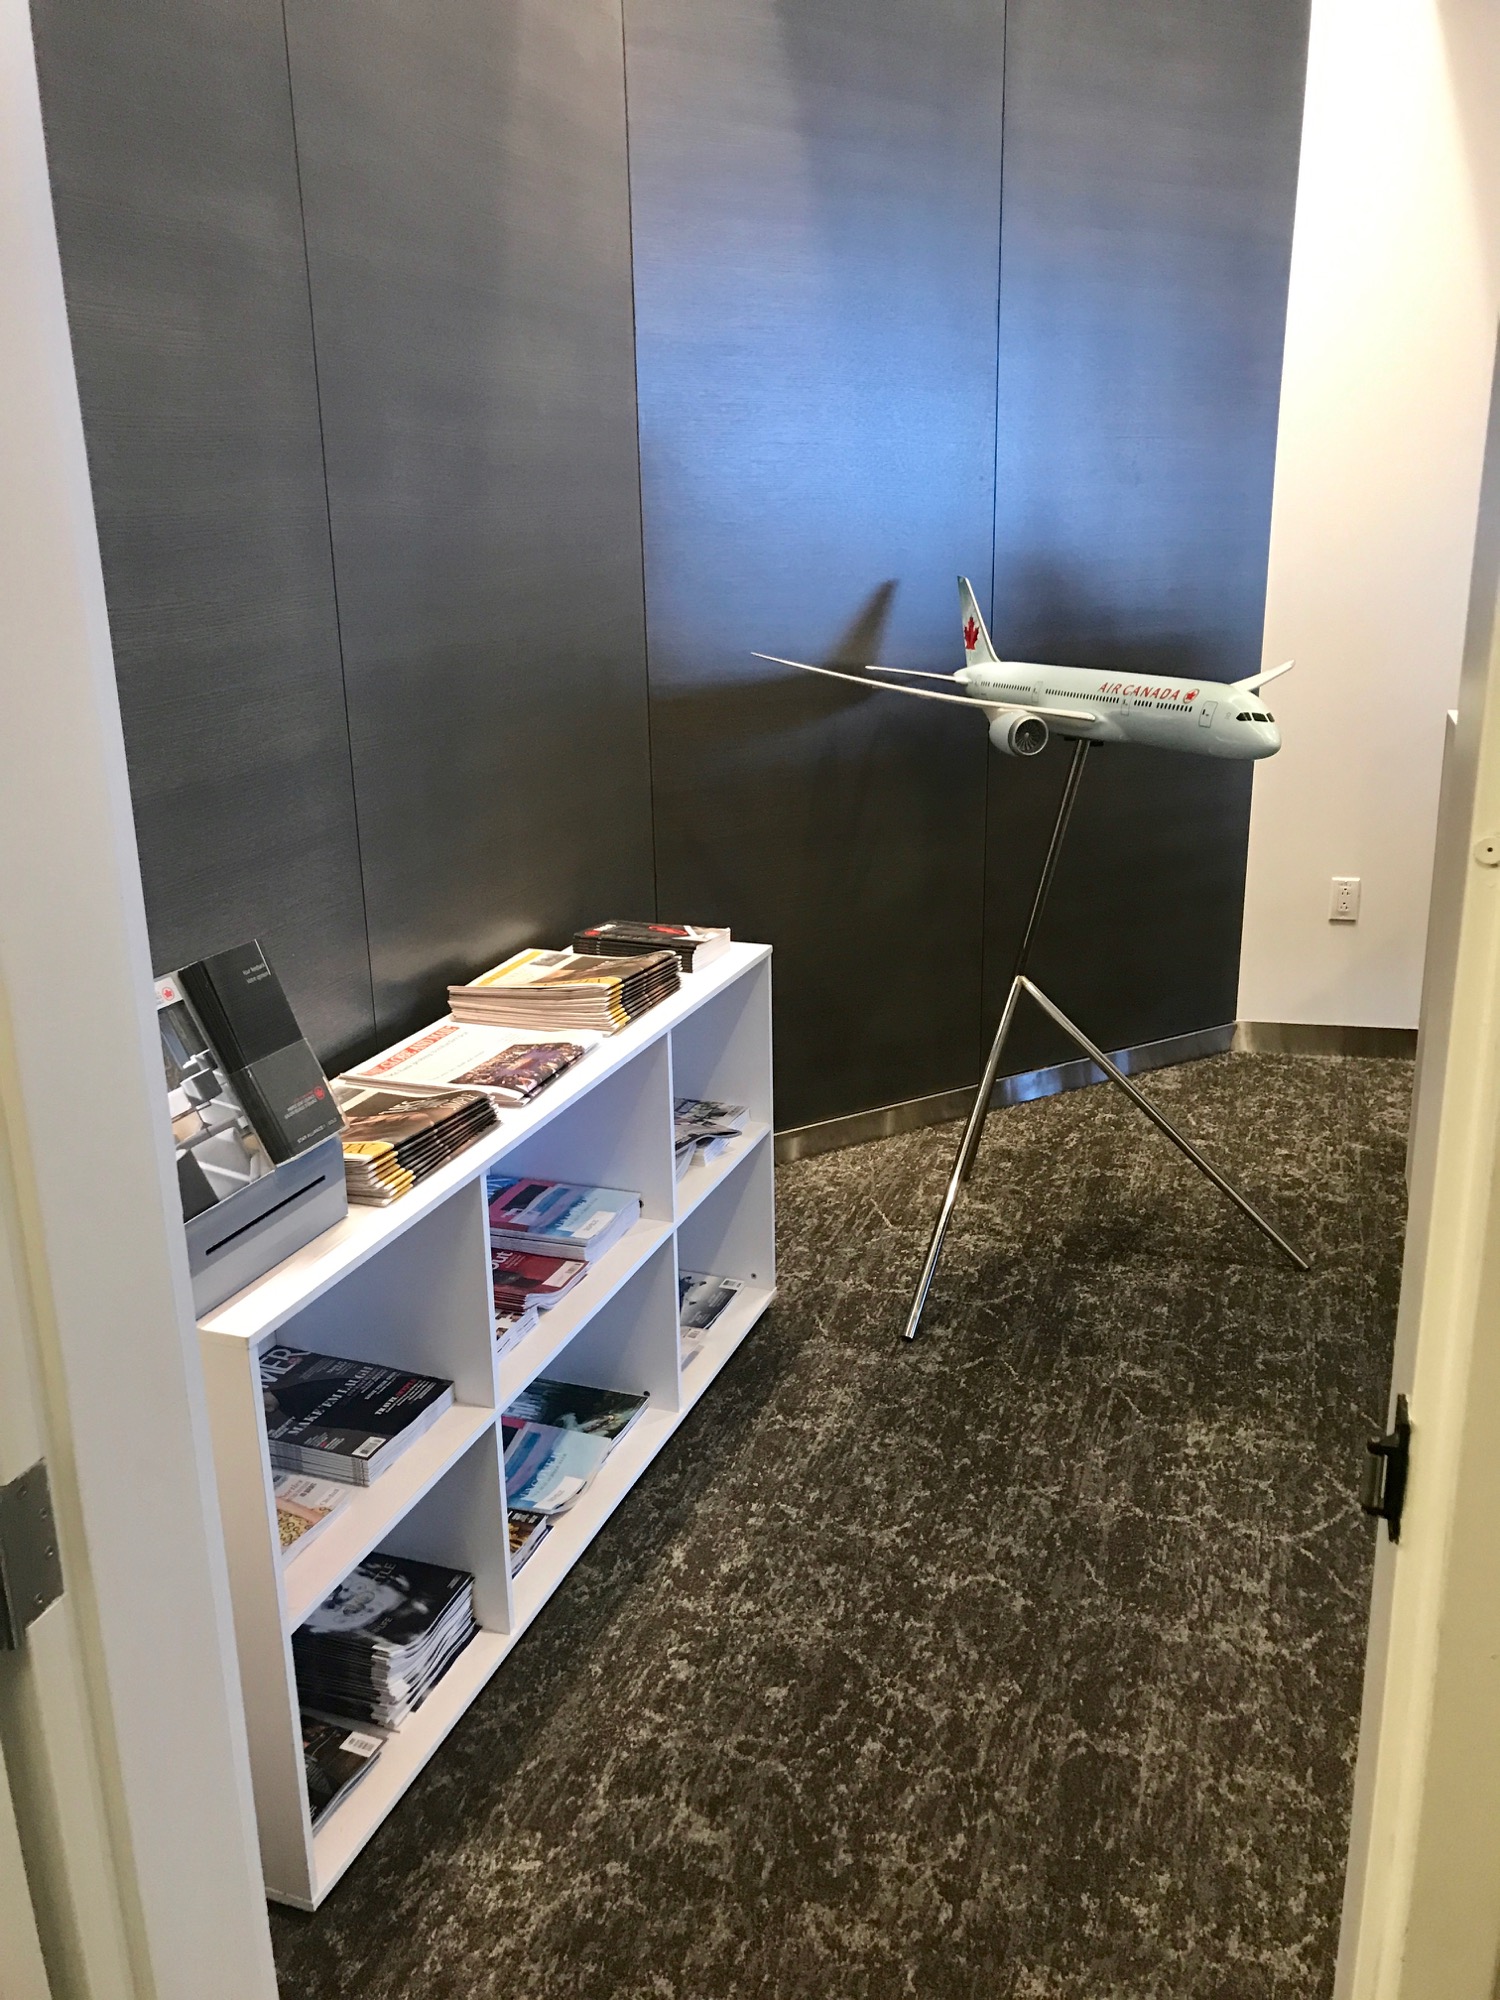 a model airplane on a stand in a room